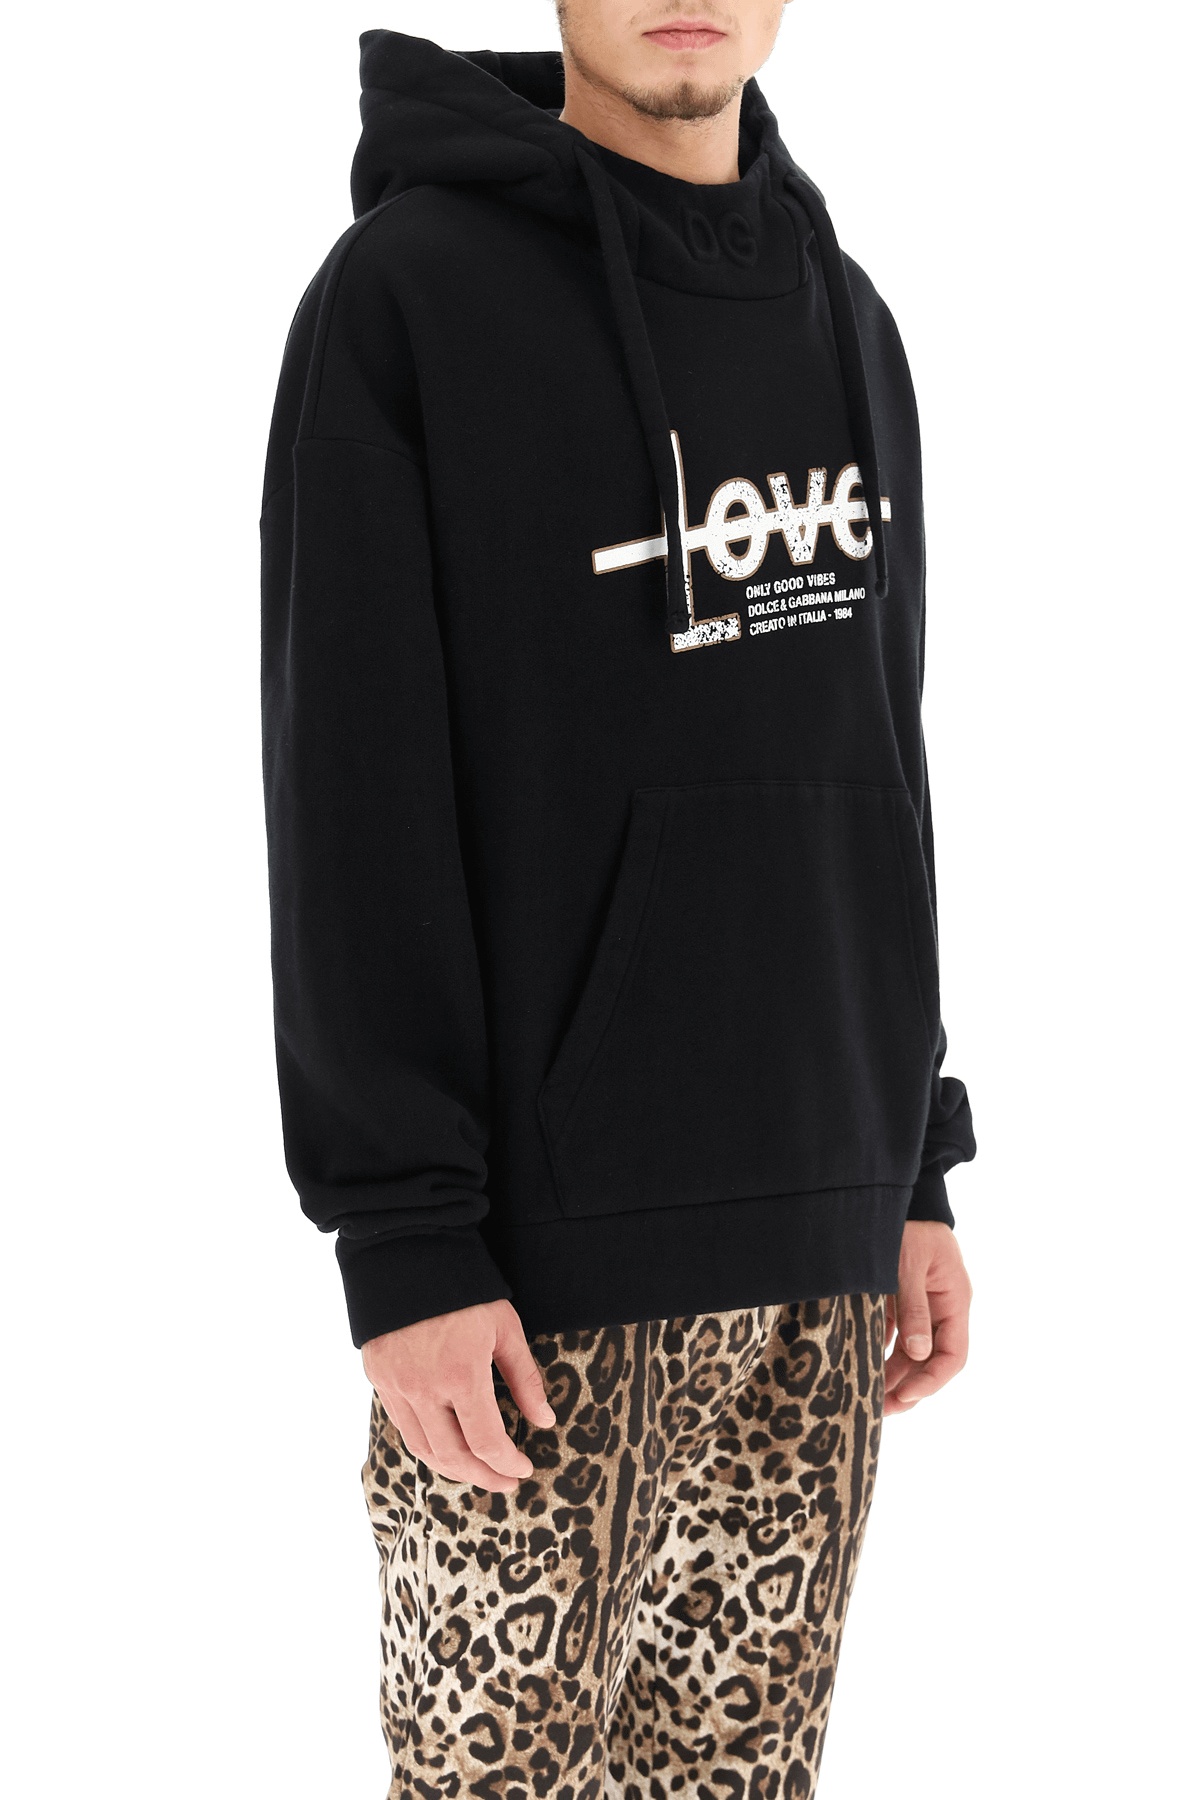 Dolce & Gabbana 'Only Good Vibes' Print Hoodie - 3